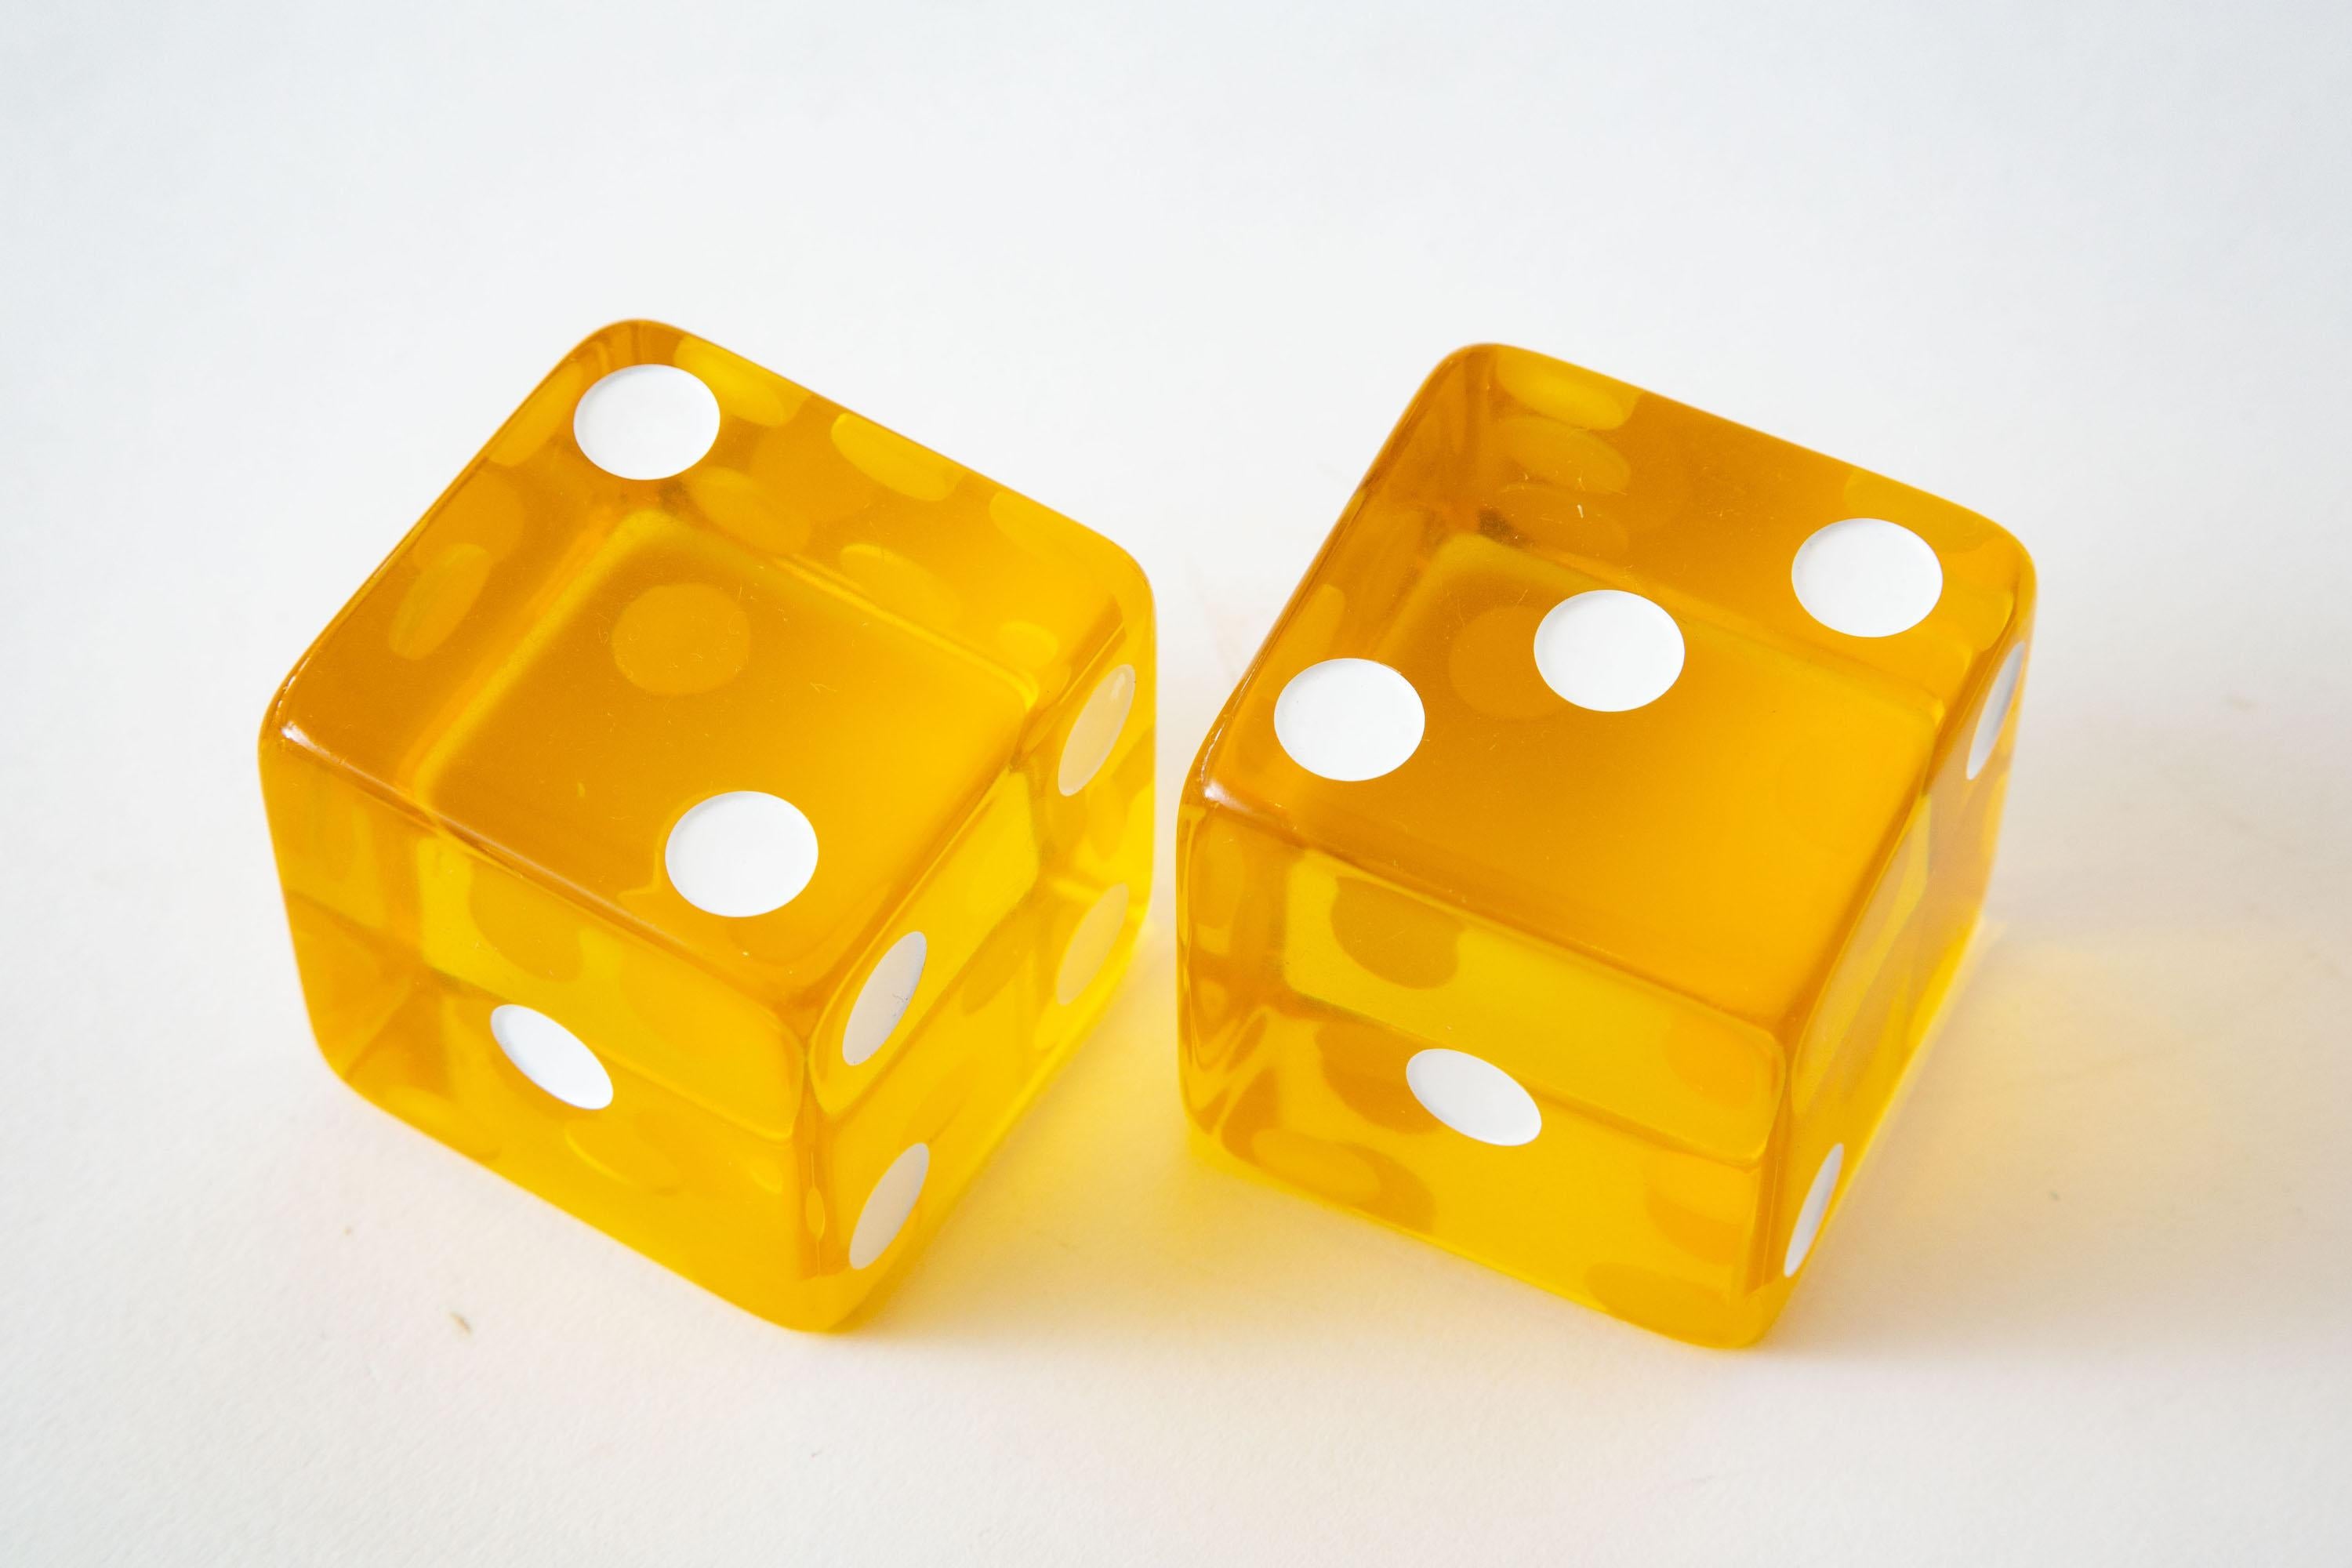  Lucite Yellow and White Square Dice Sculptures Vintage Pair Of 1